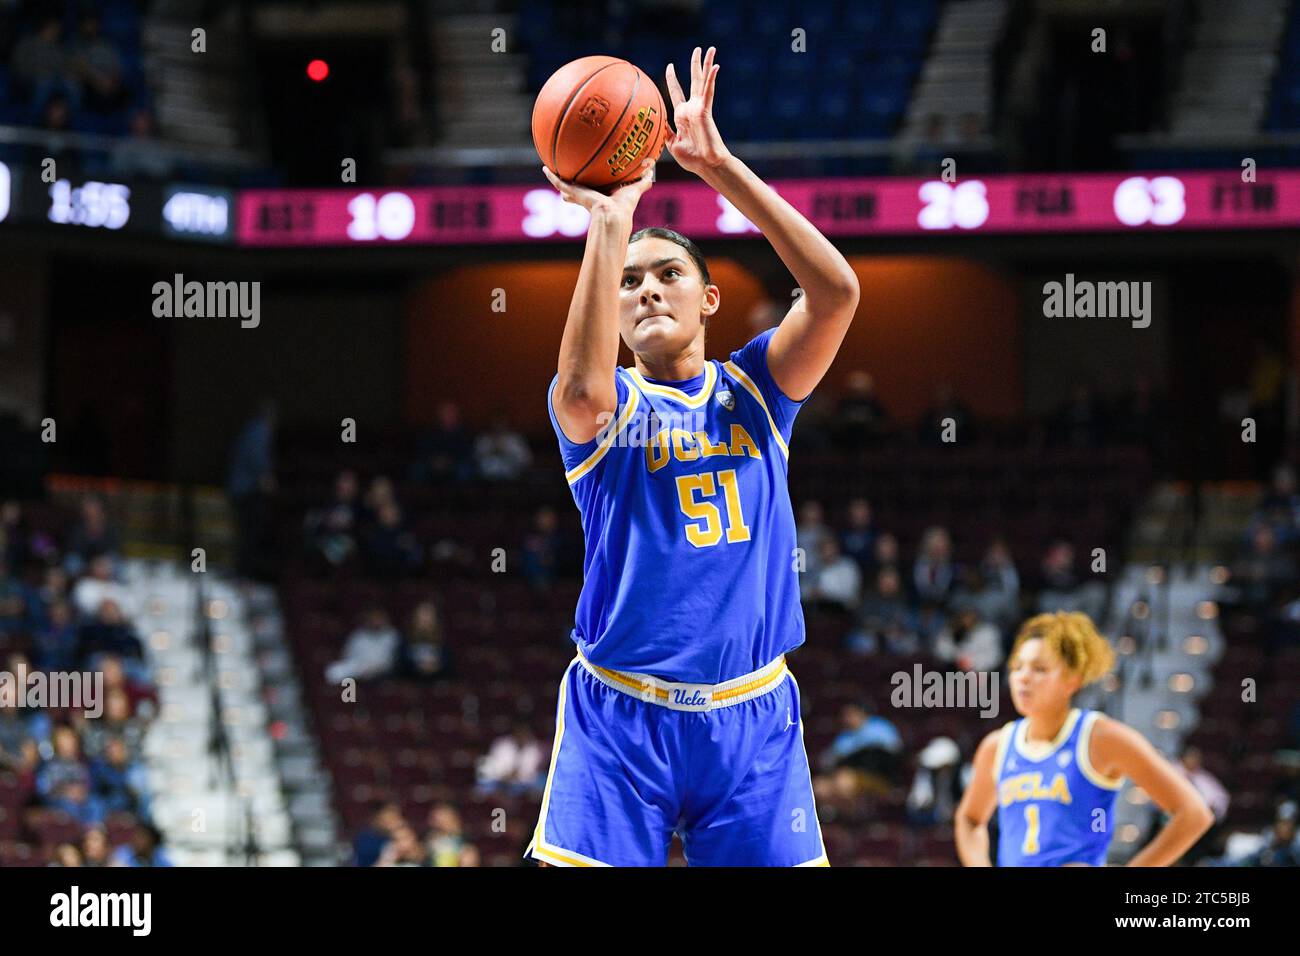 Uncasville, CT, USA. 10th Dec, 2023. UCLA Bruins center Lauren Betts (51) shoots a free throw during an NCAA women's basketball game in the Invesco QQQ Basketball Hall of Fame Women's Showcase between the Florida State Seminoles and the UCLA Bruins at Mohegan Sun Arena in Uncasville, CT. Erica Denhoff/CSM/Alamy Live News Stock Photo